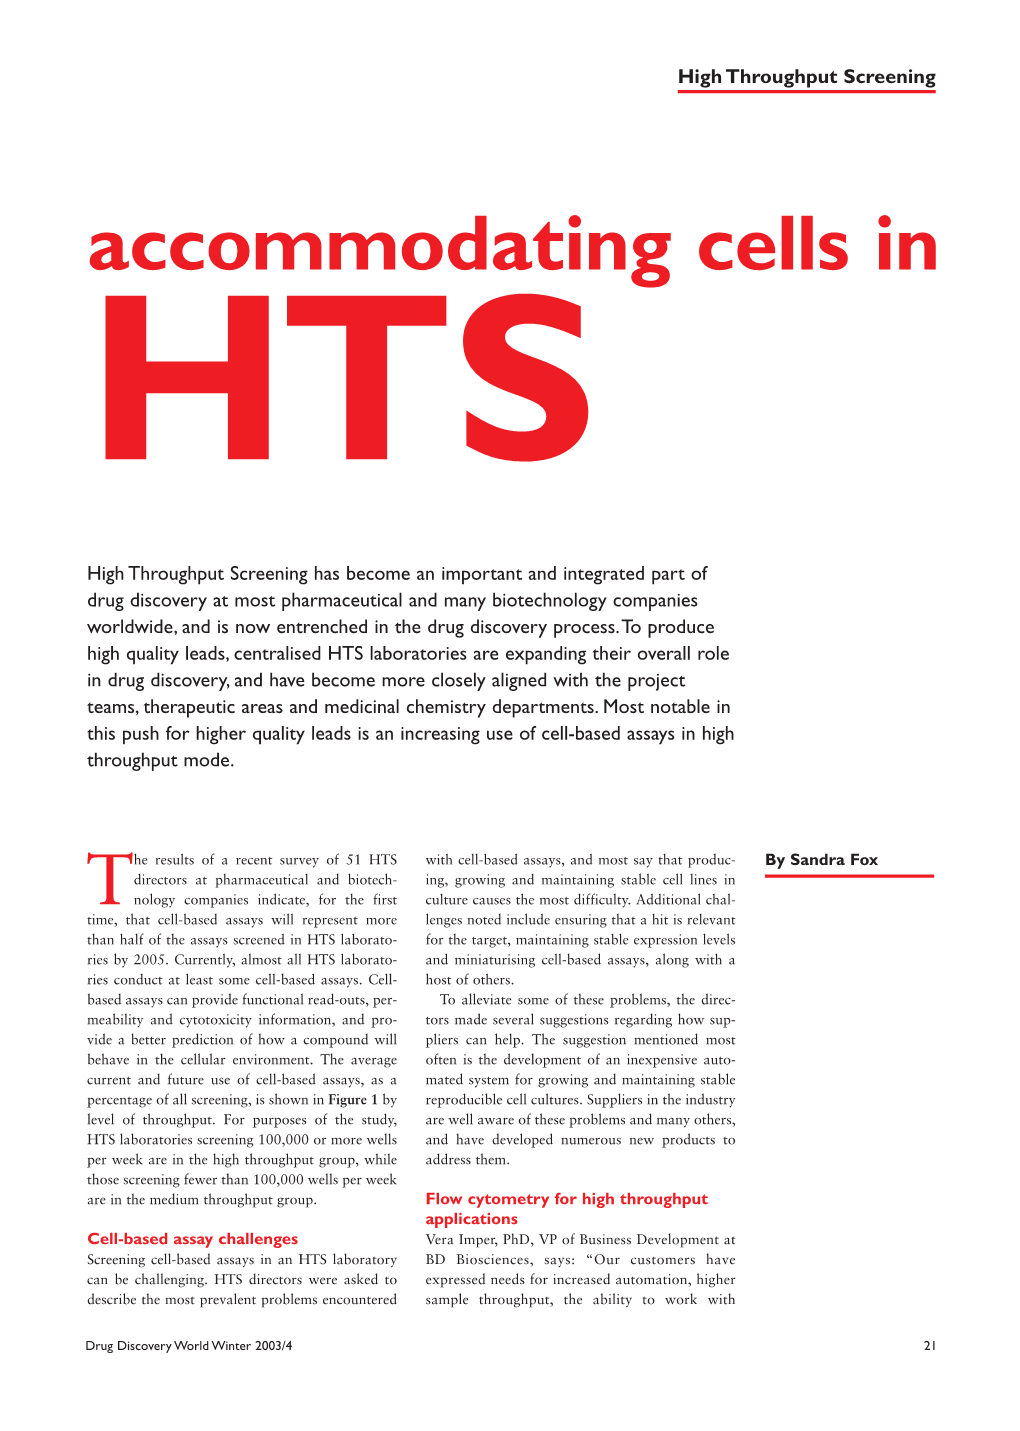 Accommodating Cells in HTS